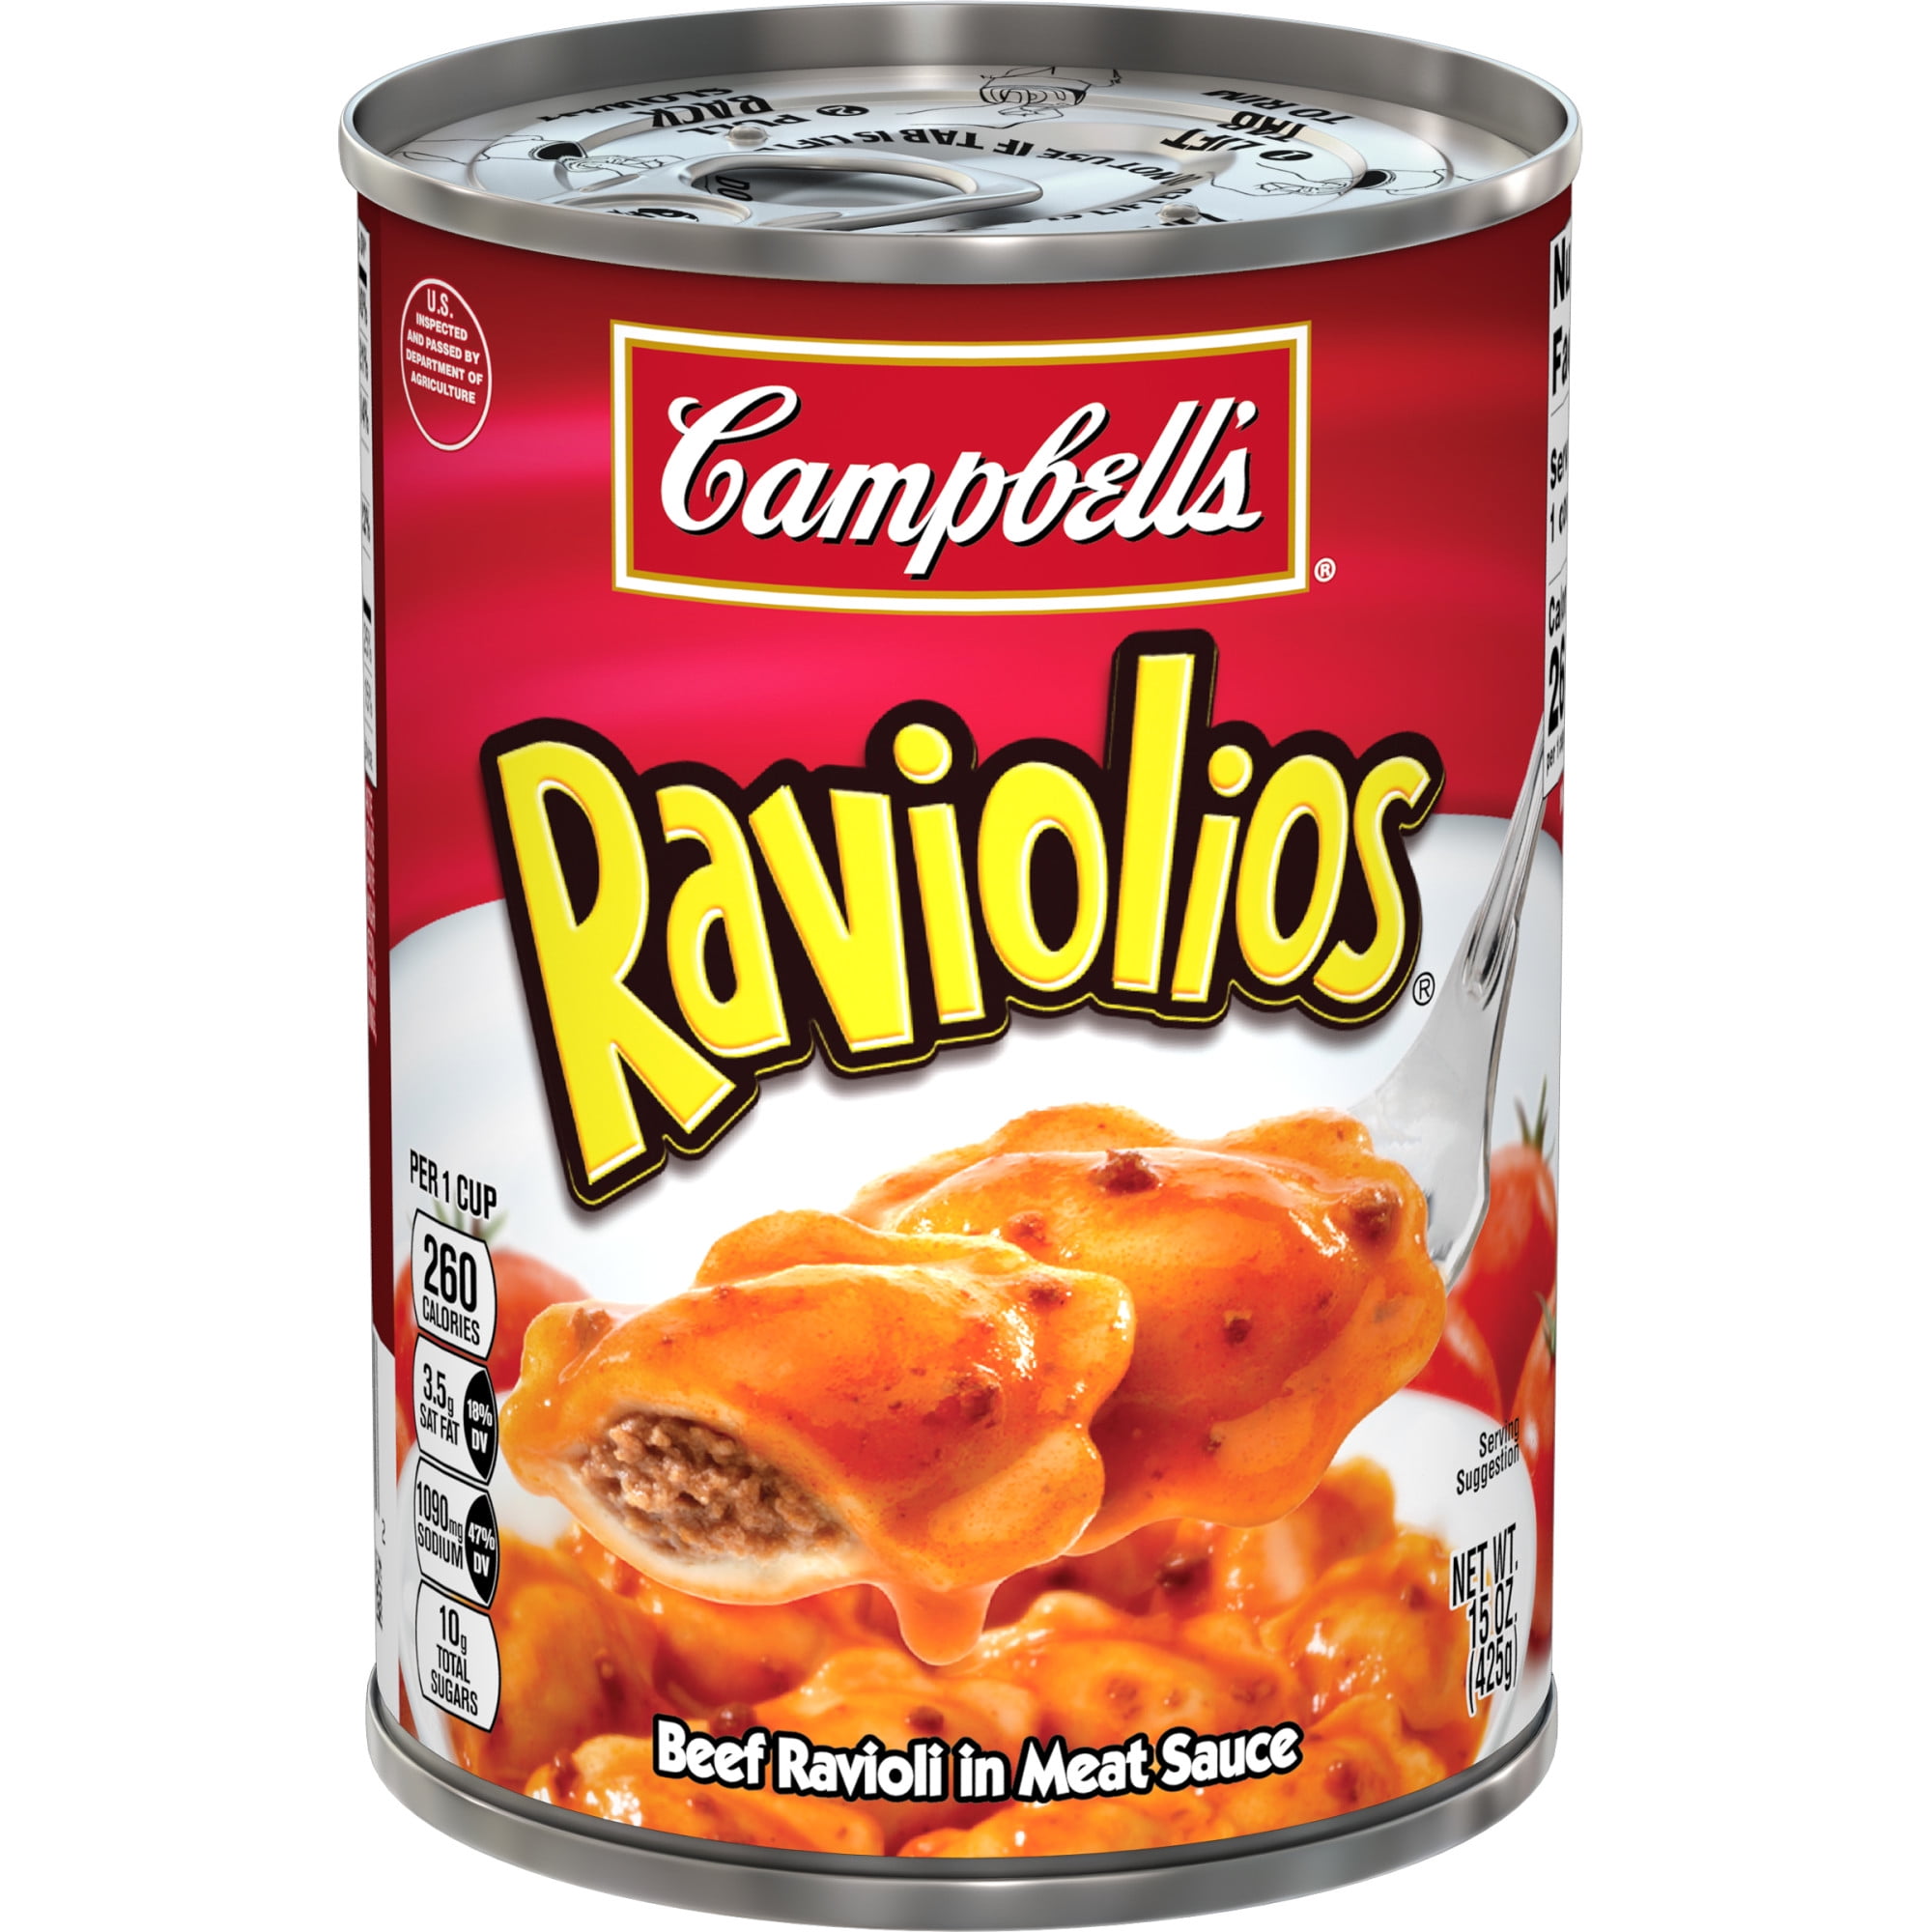 Campbell's Canned Pasta, RavioliOs Beef Ravioli in Meat Sauce, 15 oz. Can 